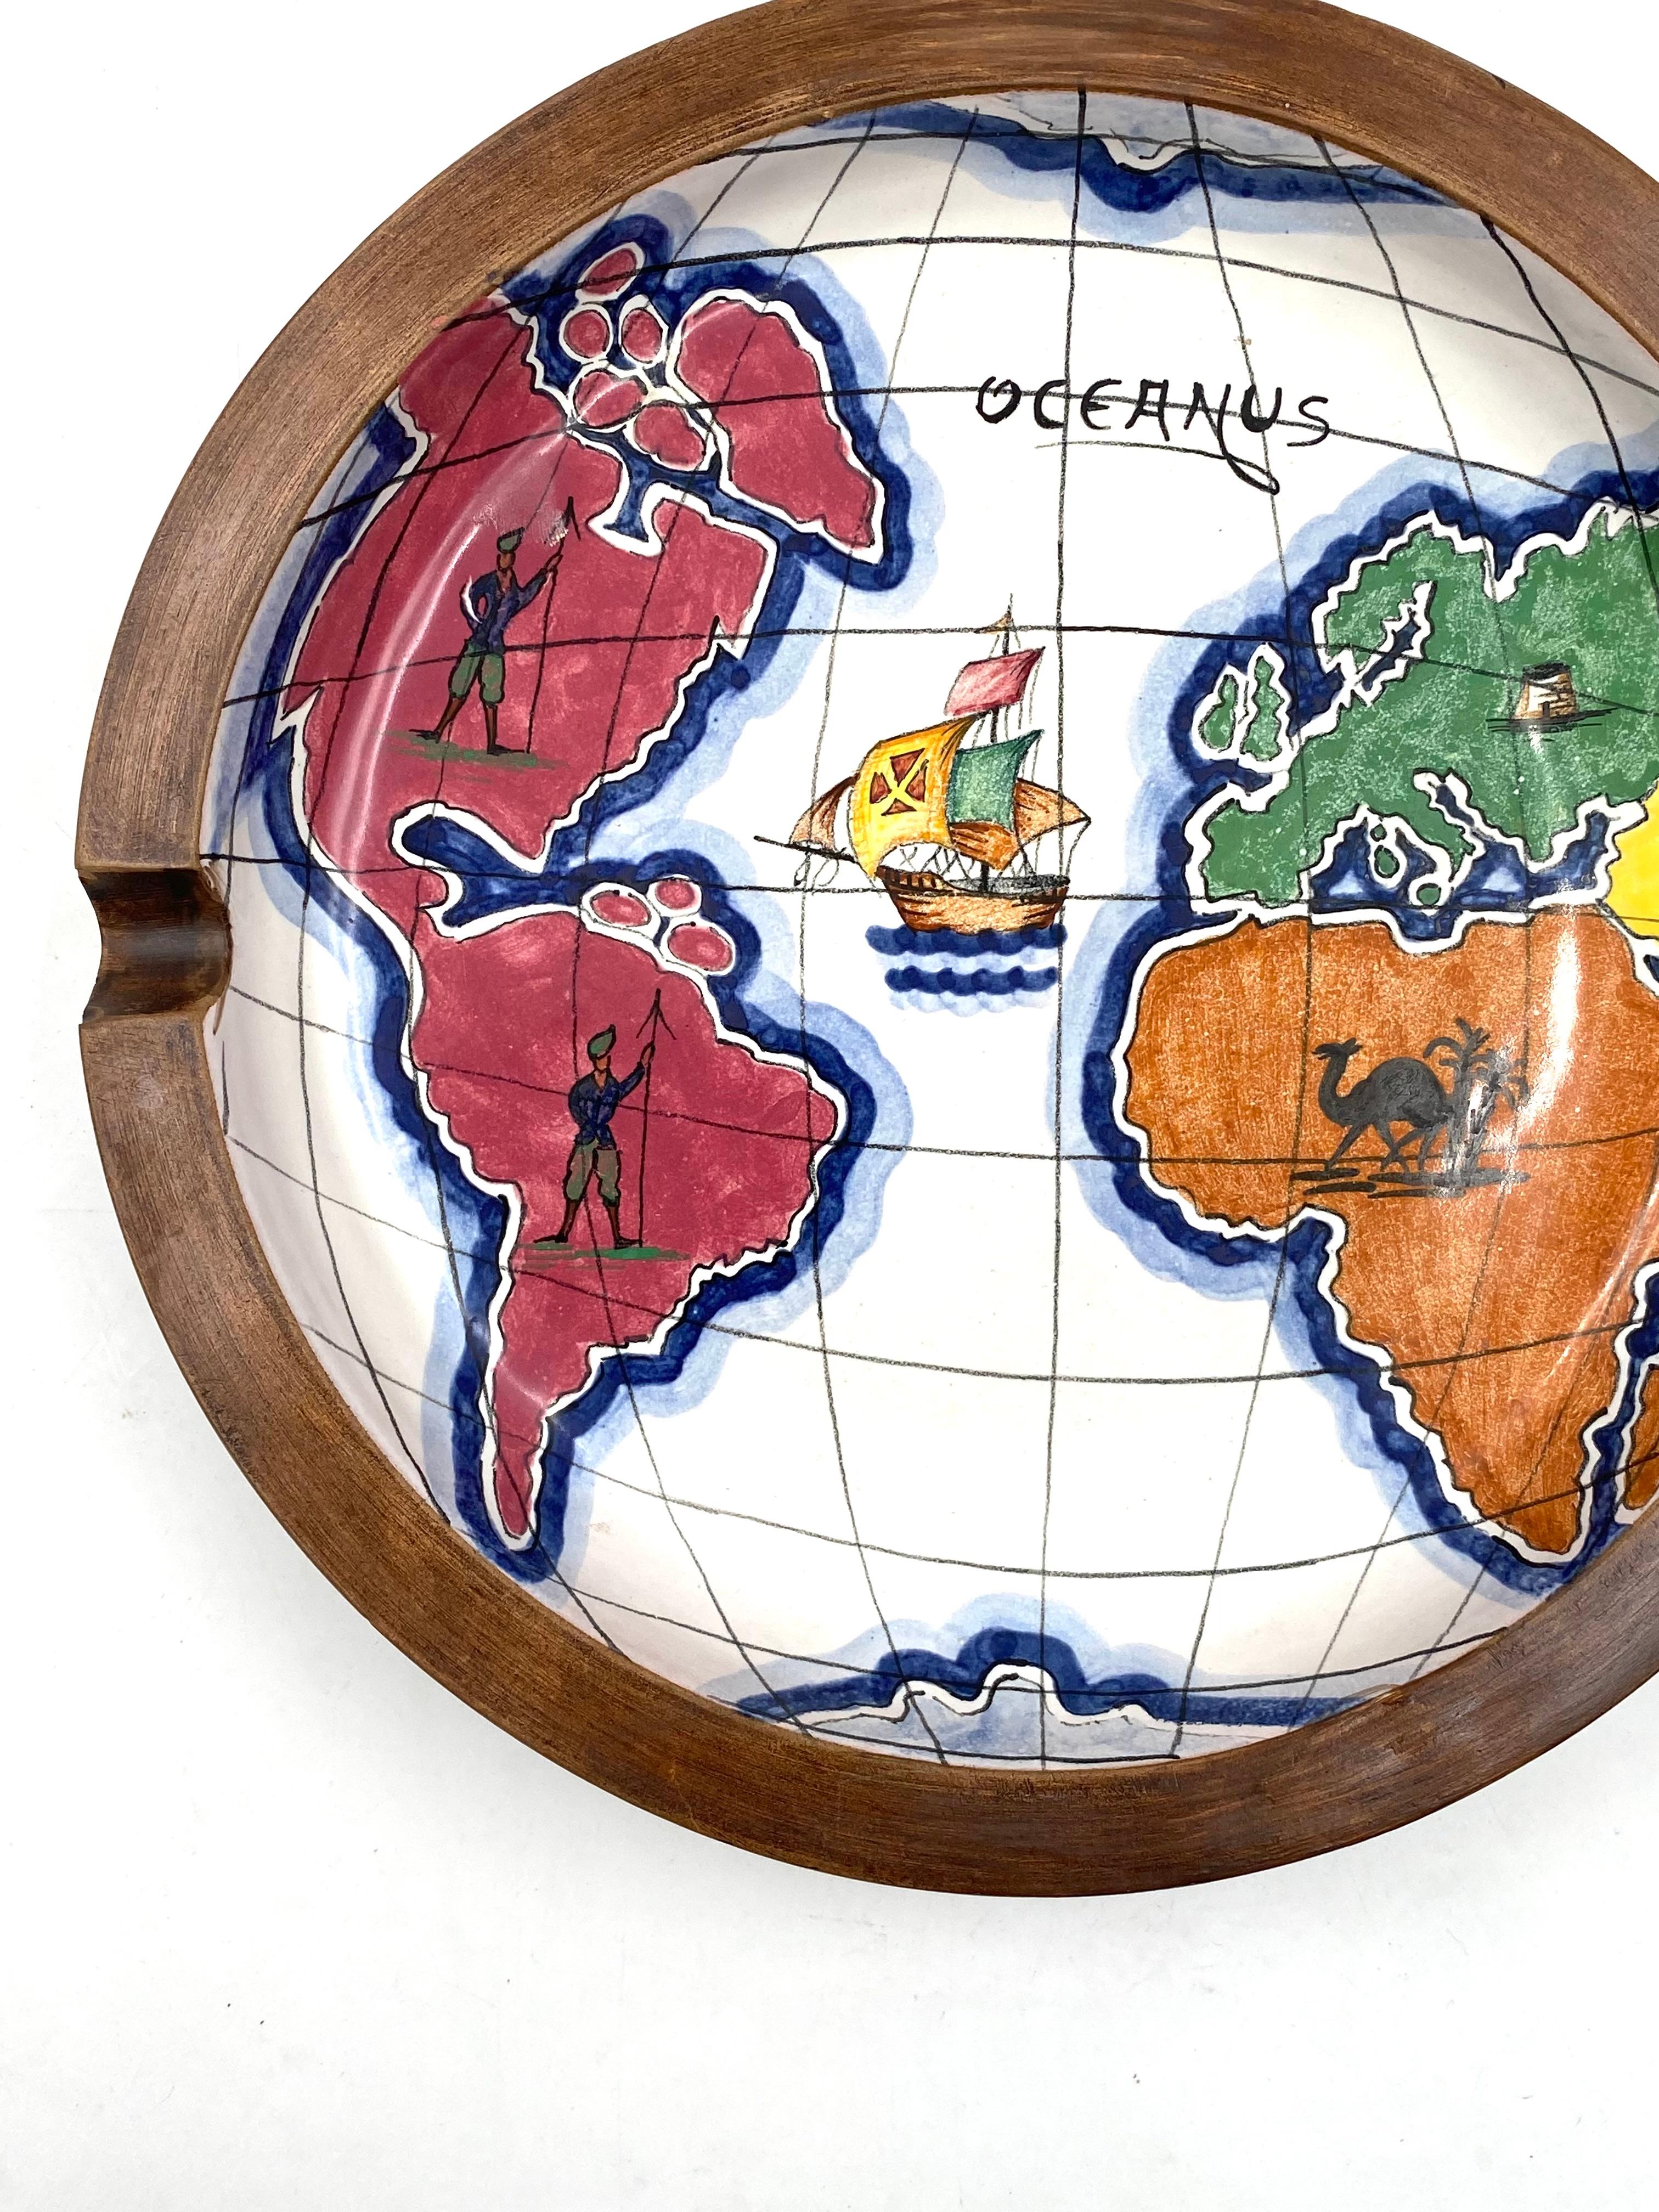 Polychrome Ceramic World Map Catchall / Ashtray, Zaccagnini, Italy, 1940s For Sale 7